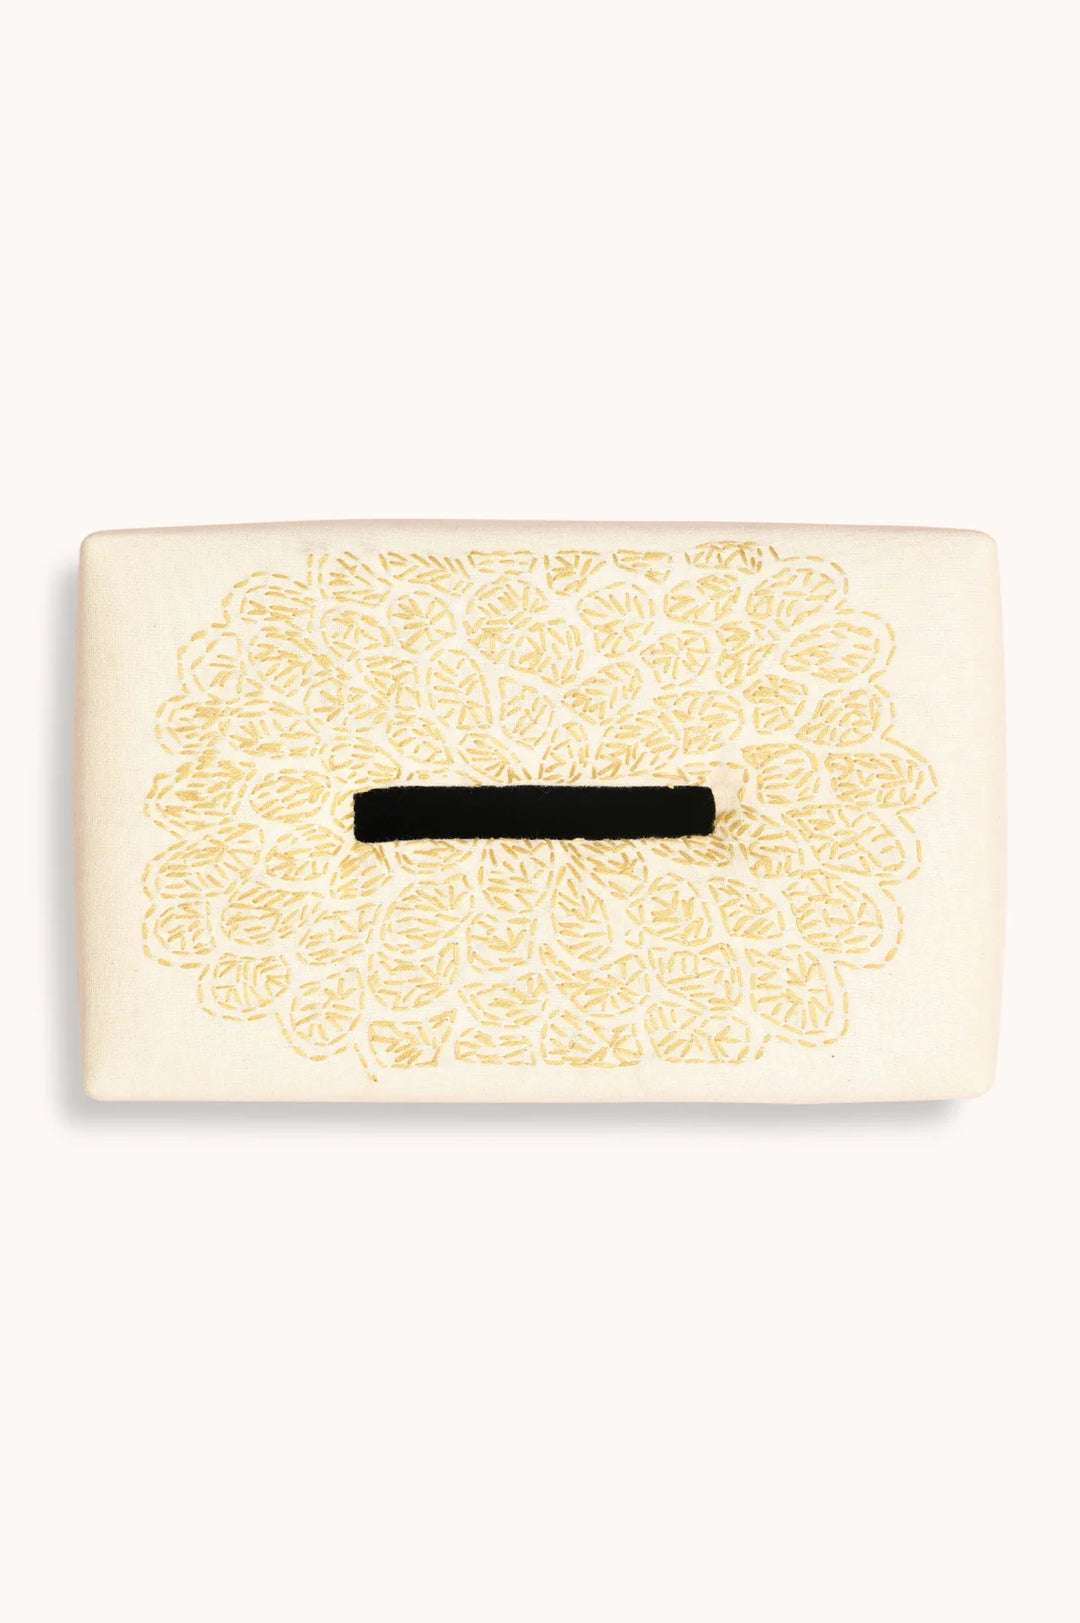 Japanese Floral Design Tissue Box with Gold Accent | Lucia Handwoven Tissue Box - Yellow